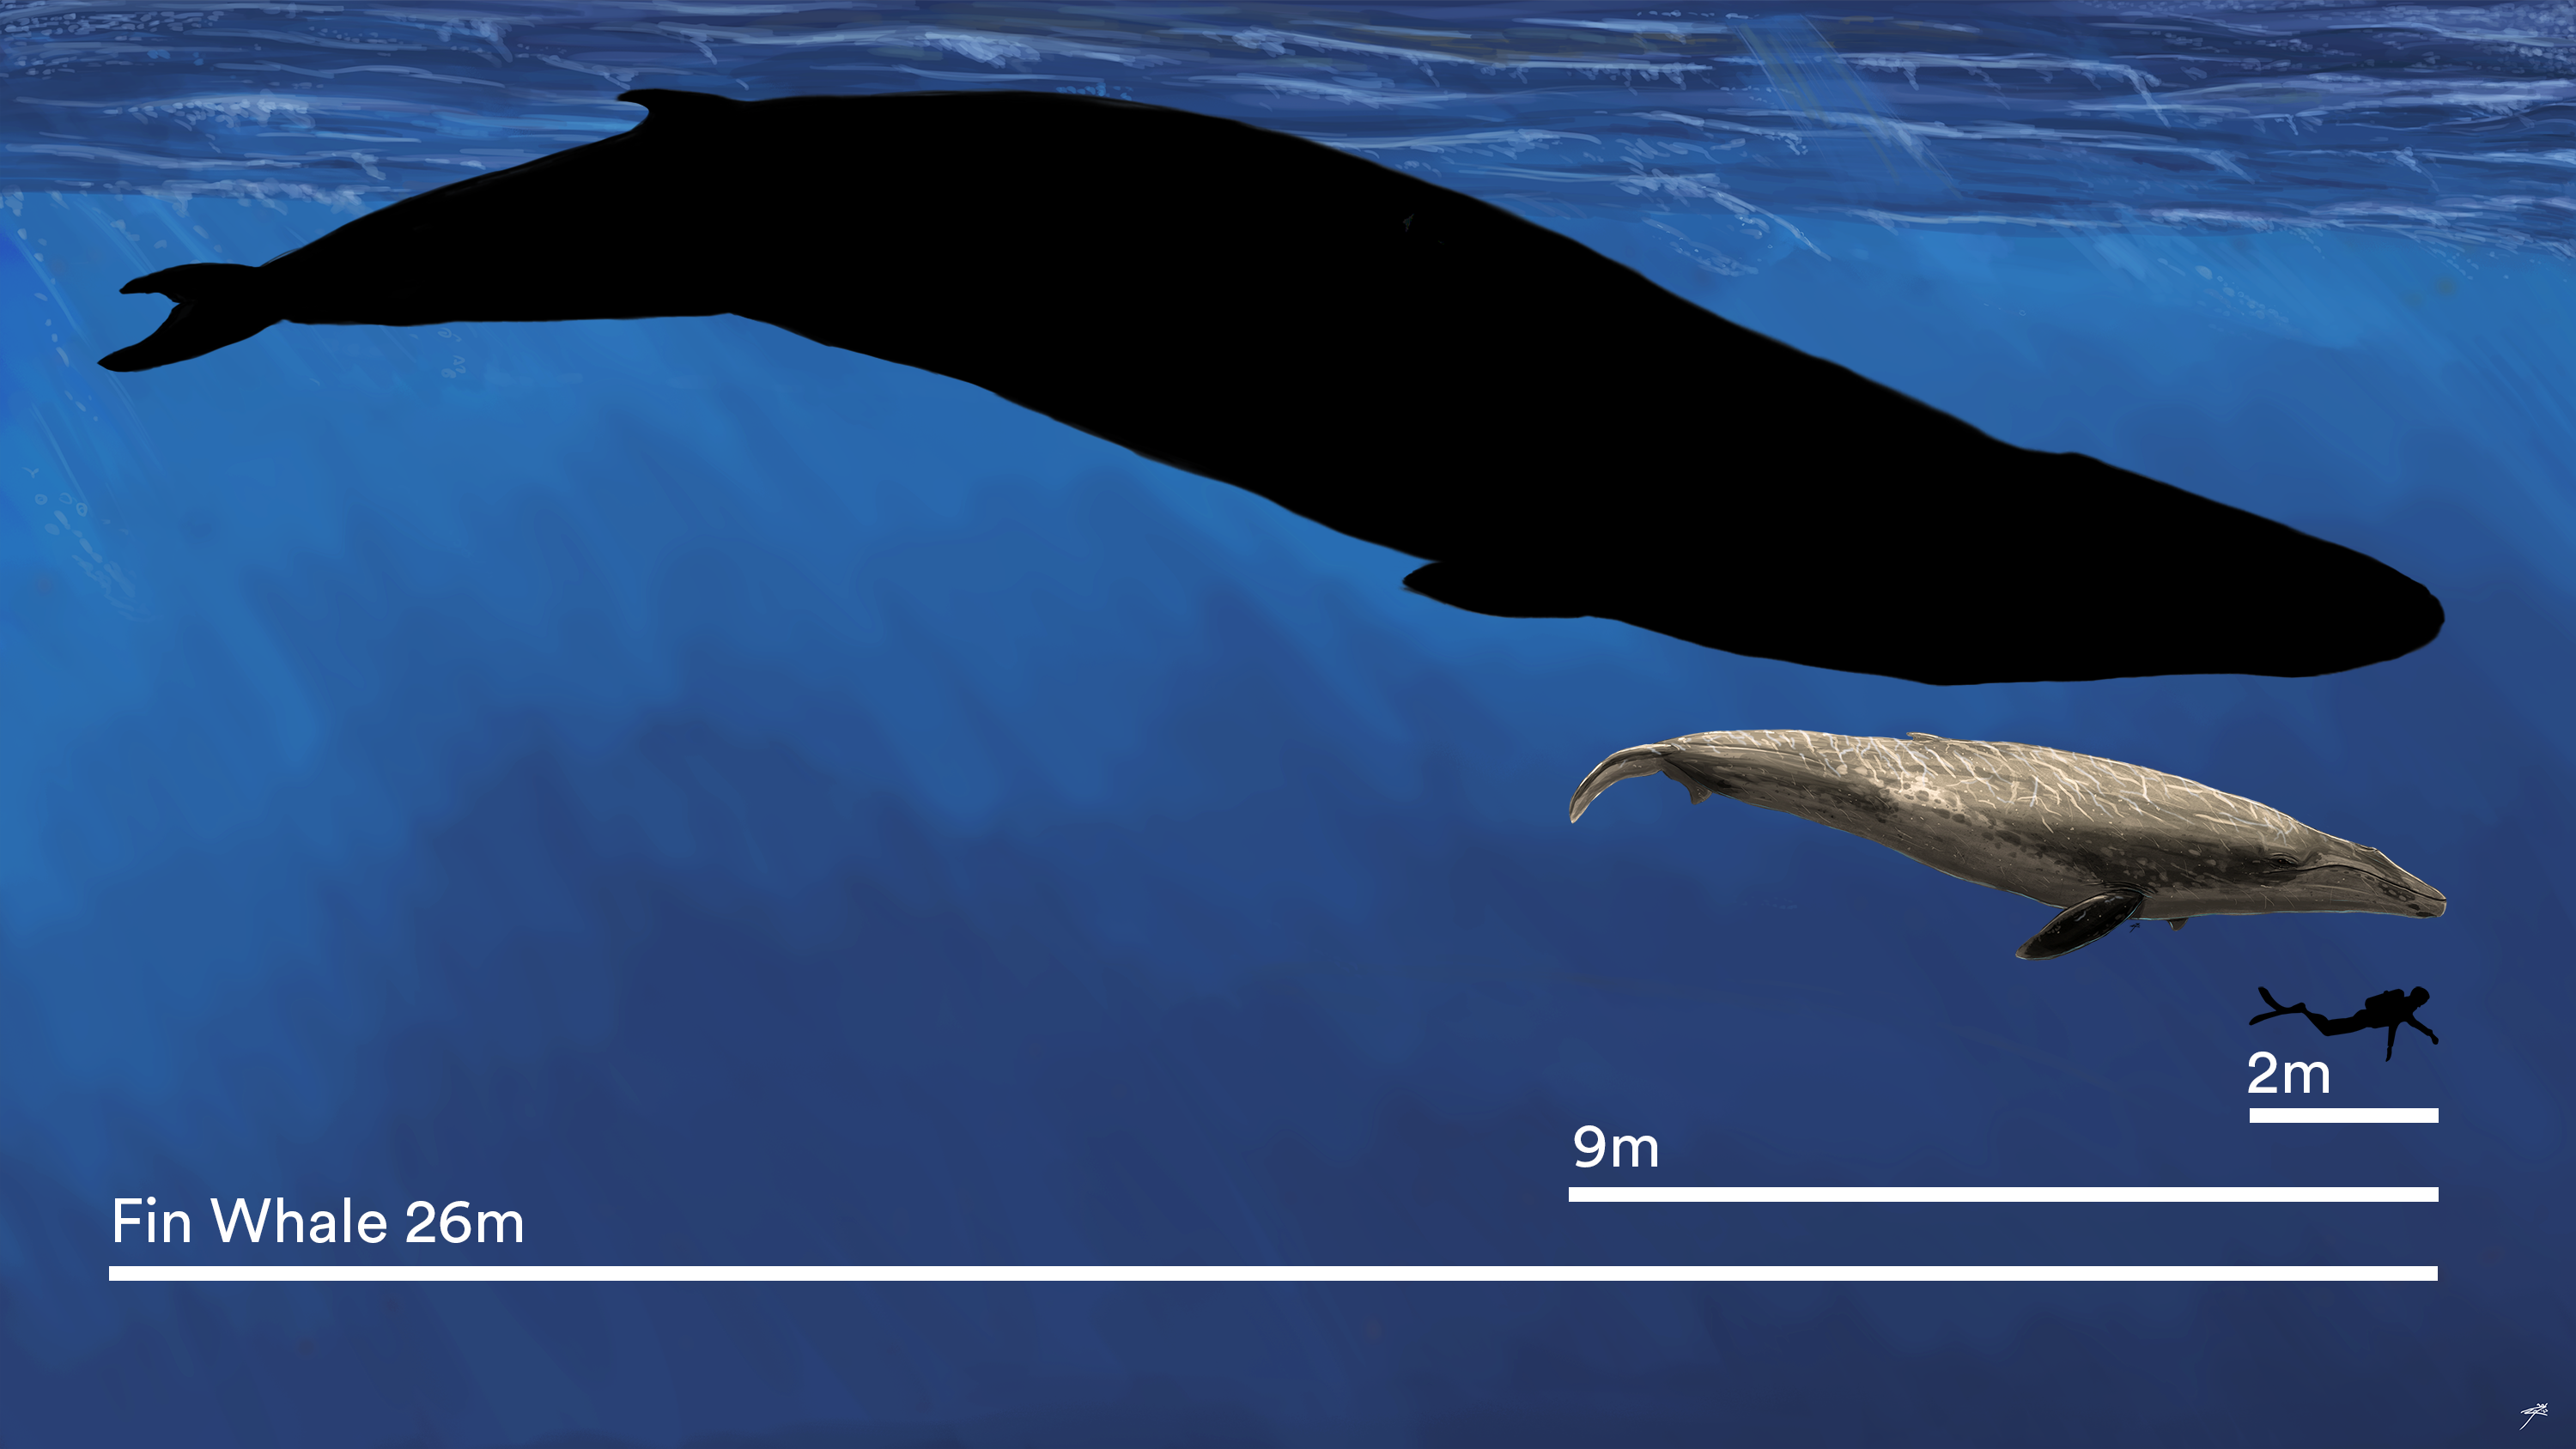 Size comparison of fin whales, Murray whales and divers